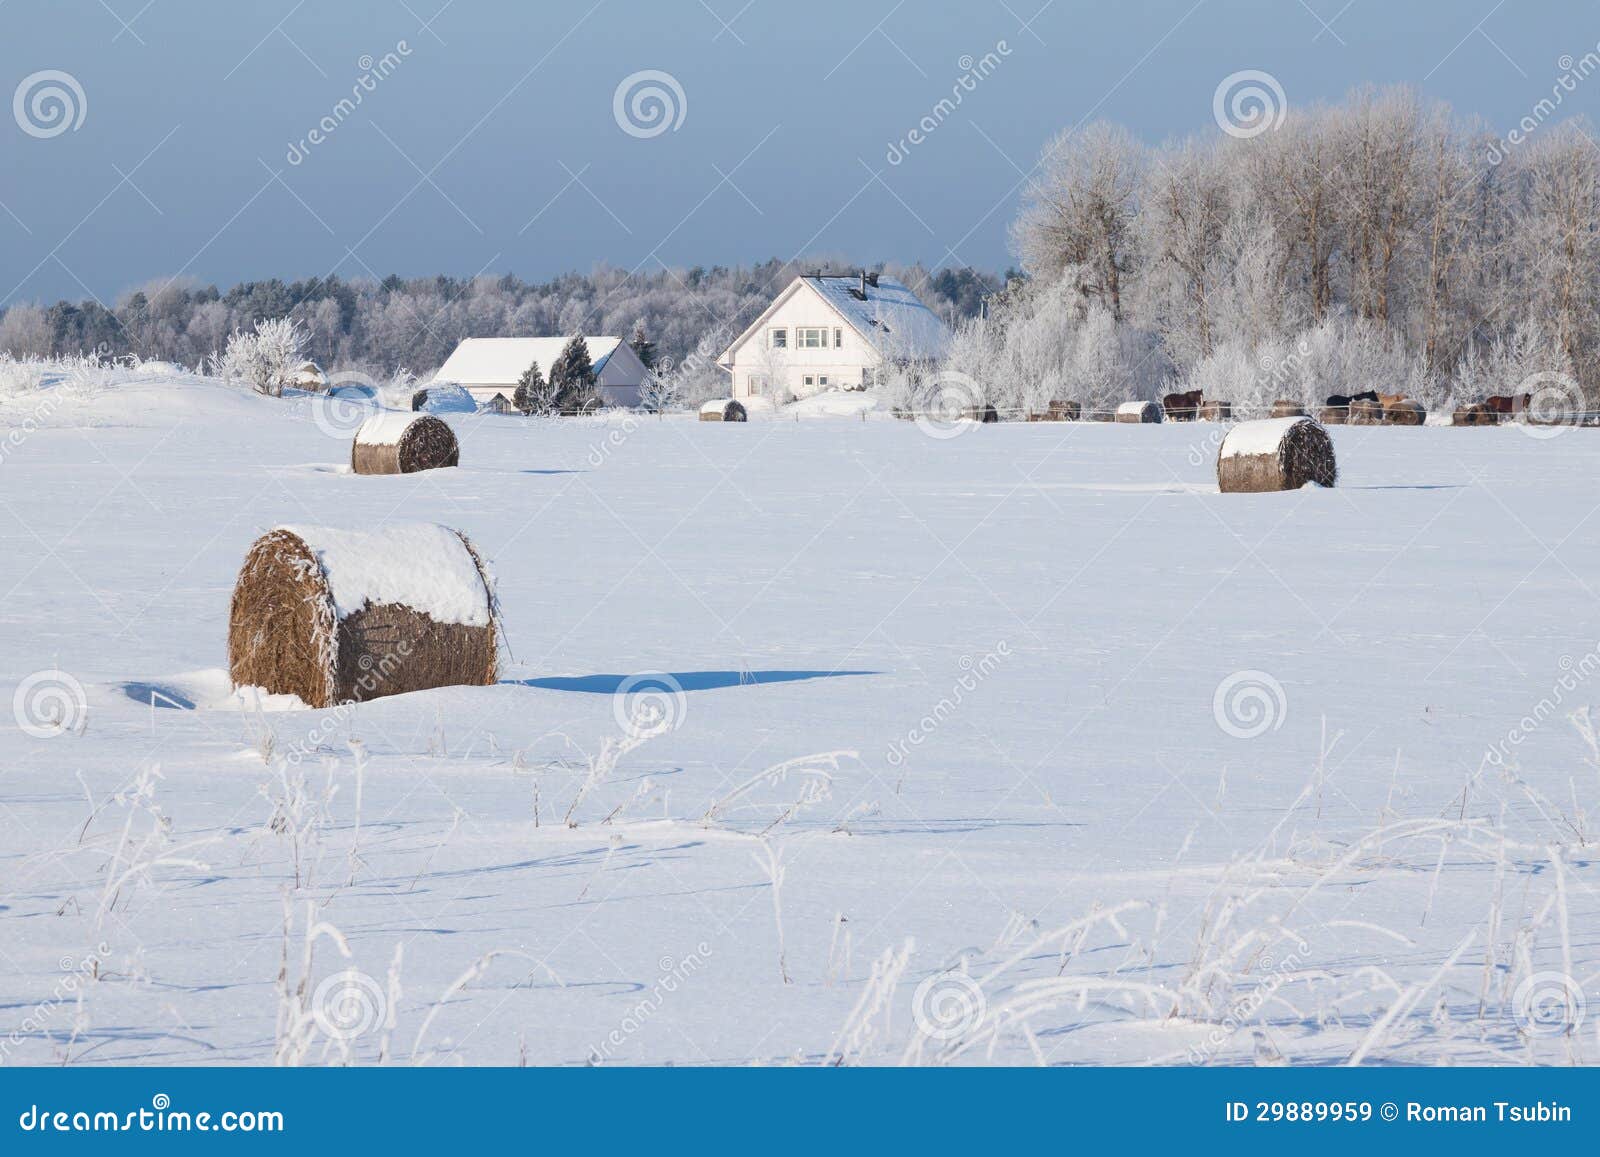 Barns with Horses in Snow